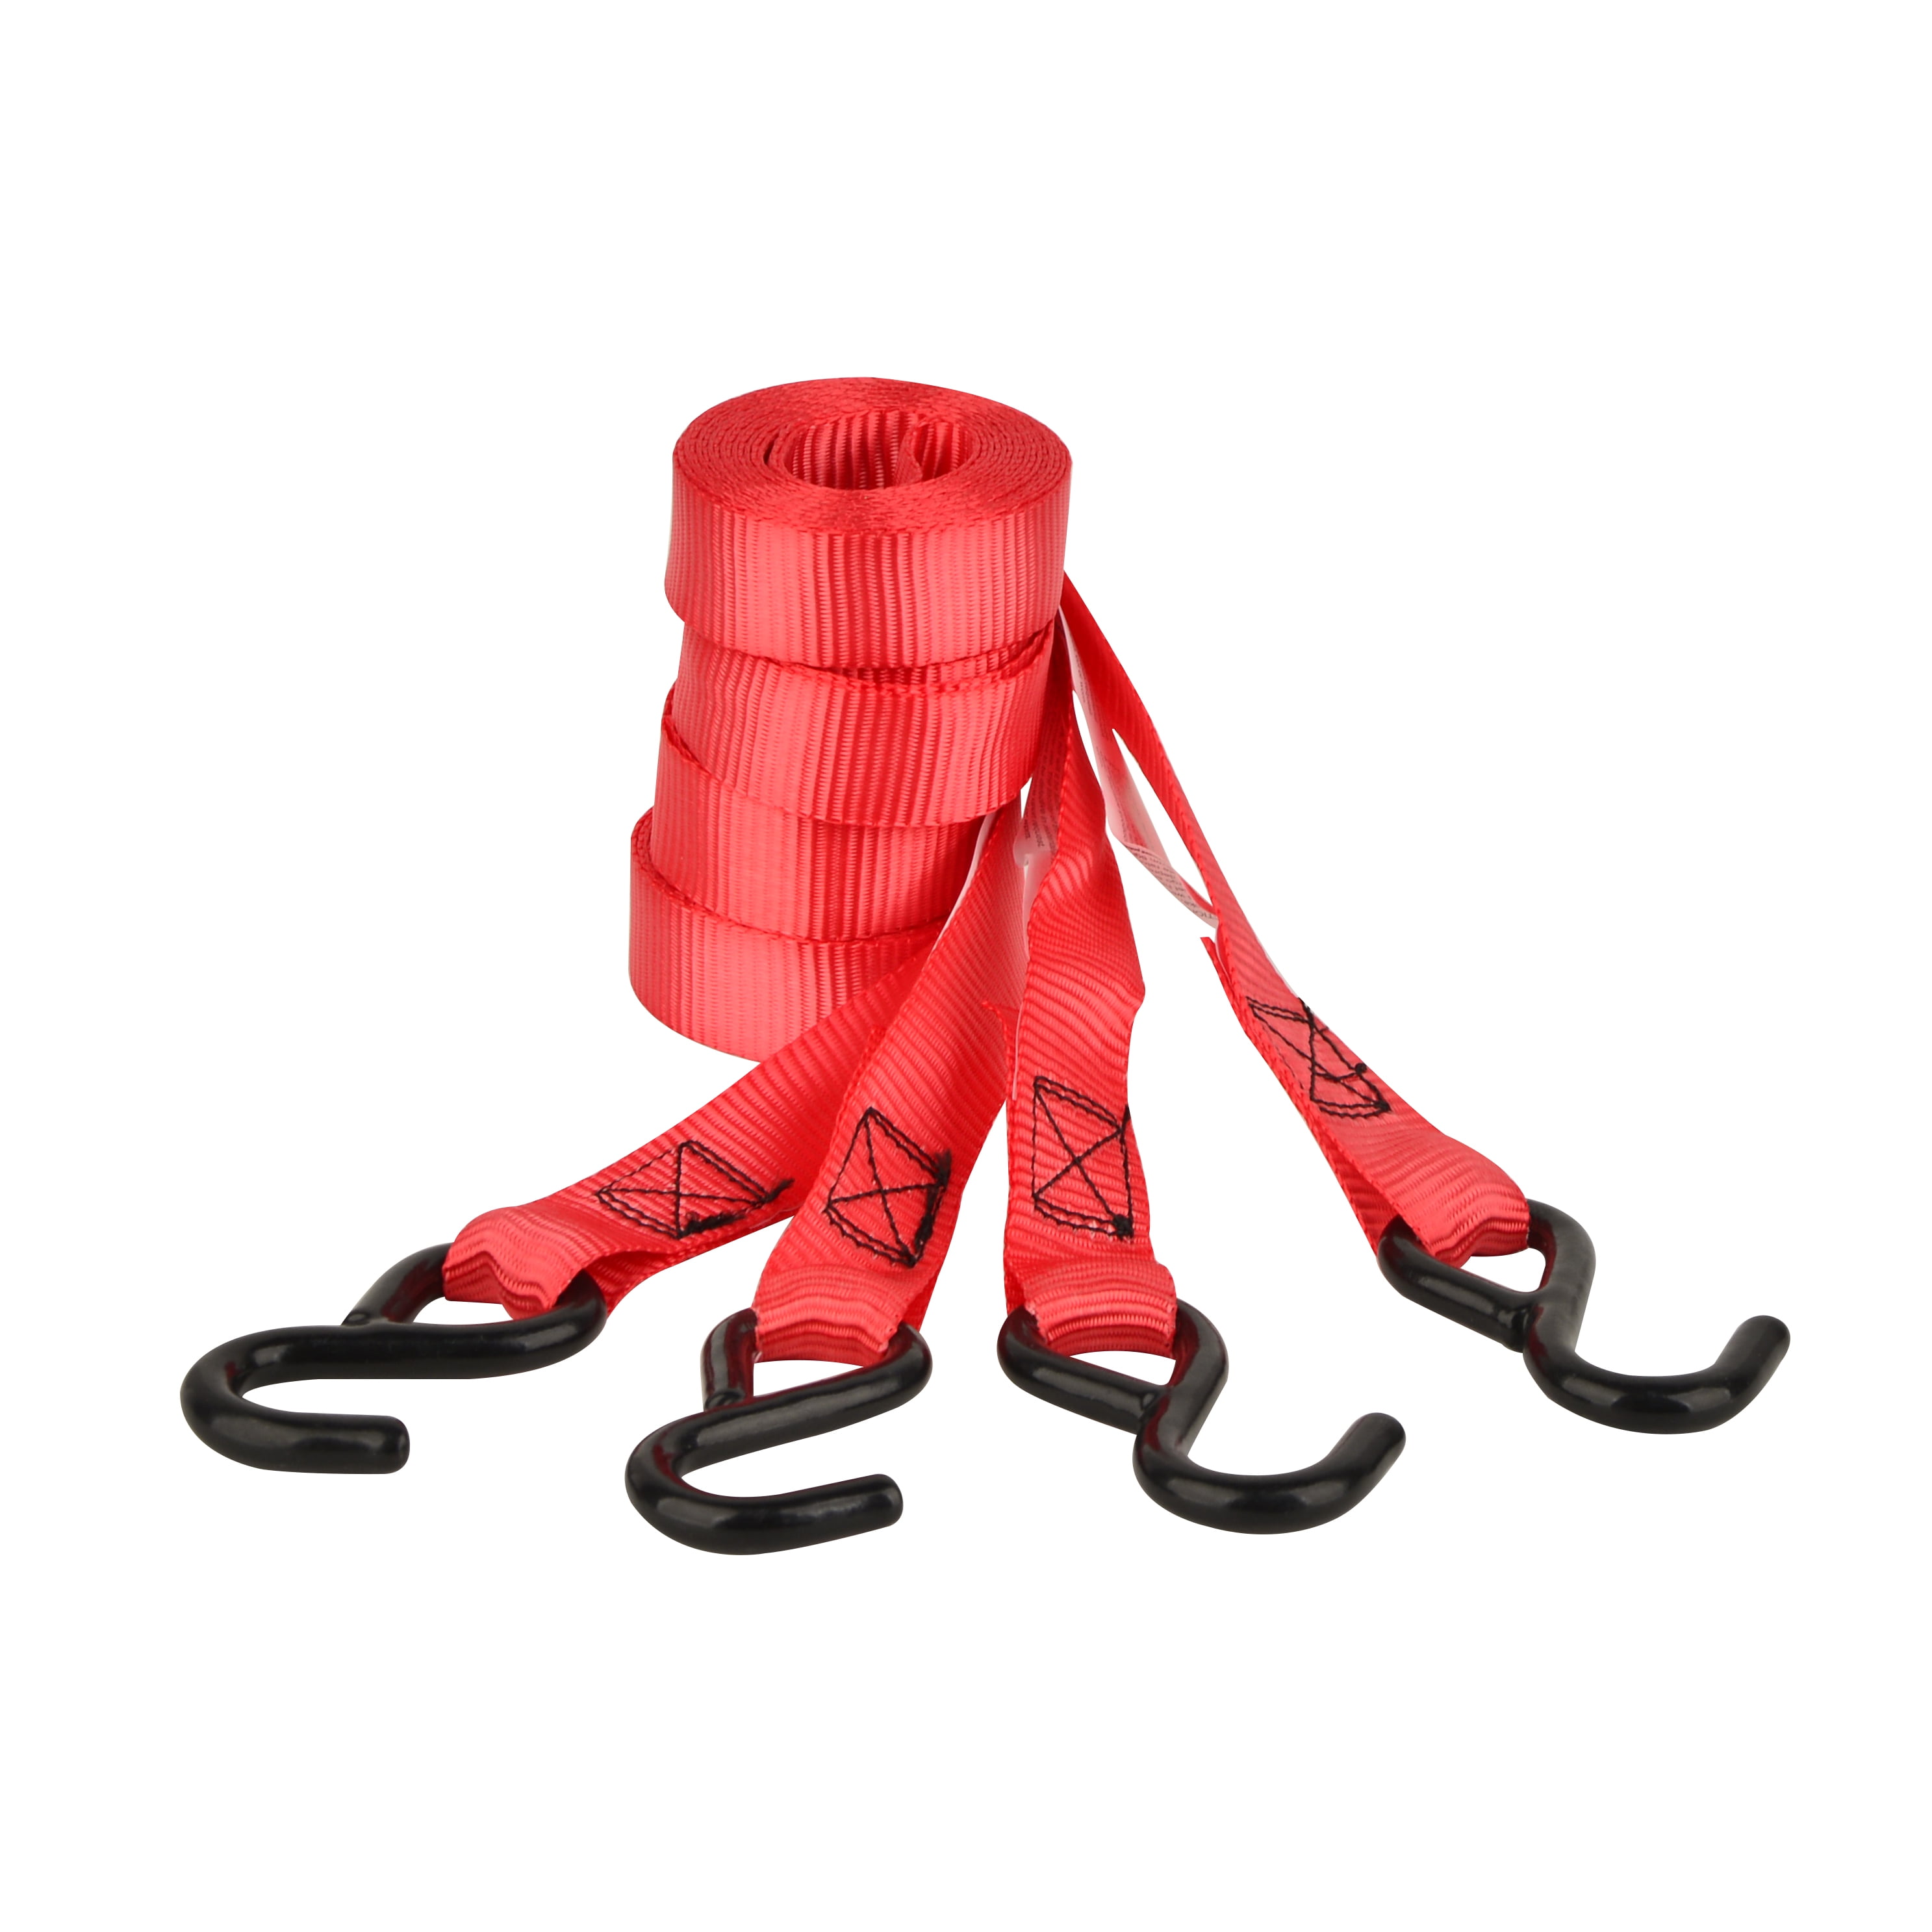 Erickson 01331 RED 1 x 10 Retractable Ratcheting Tie-Down Strap 900 lb Load Capacity,